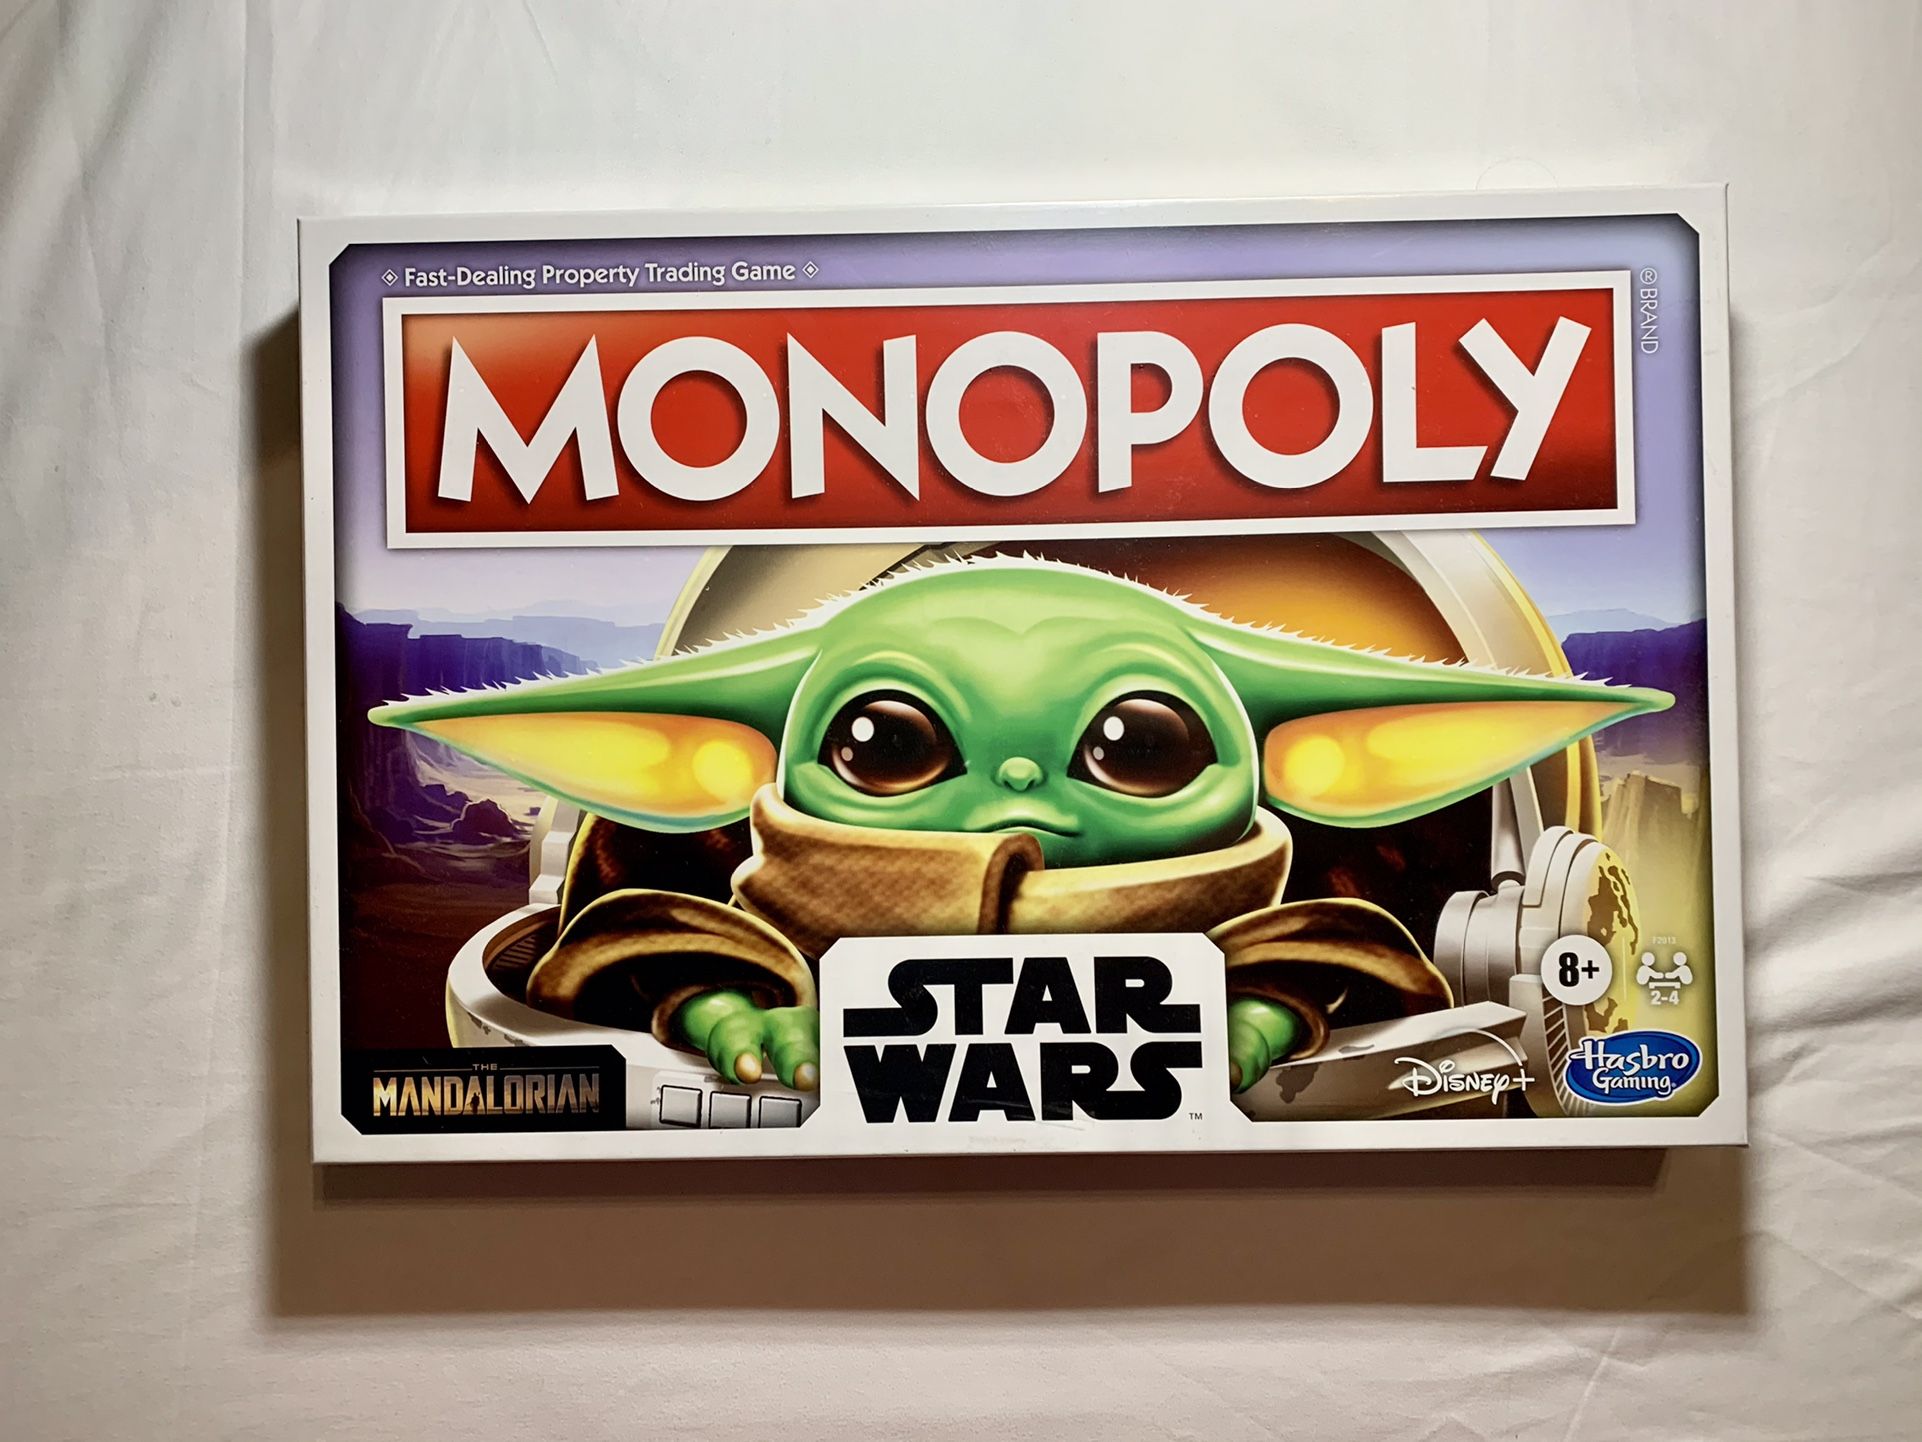 Star Wars The Mandalorian The Child “Baby Yoda” Edition Monopoly New/Sealed